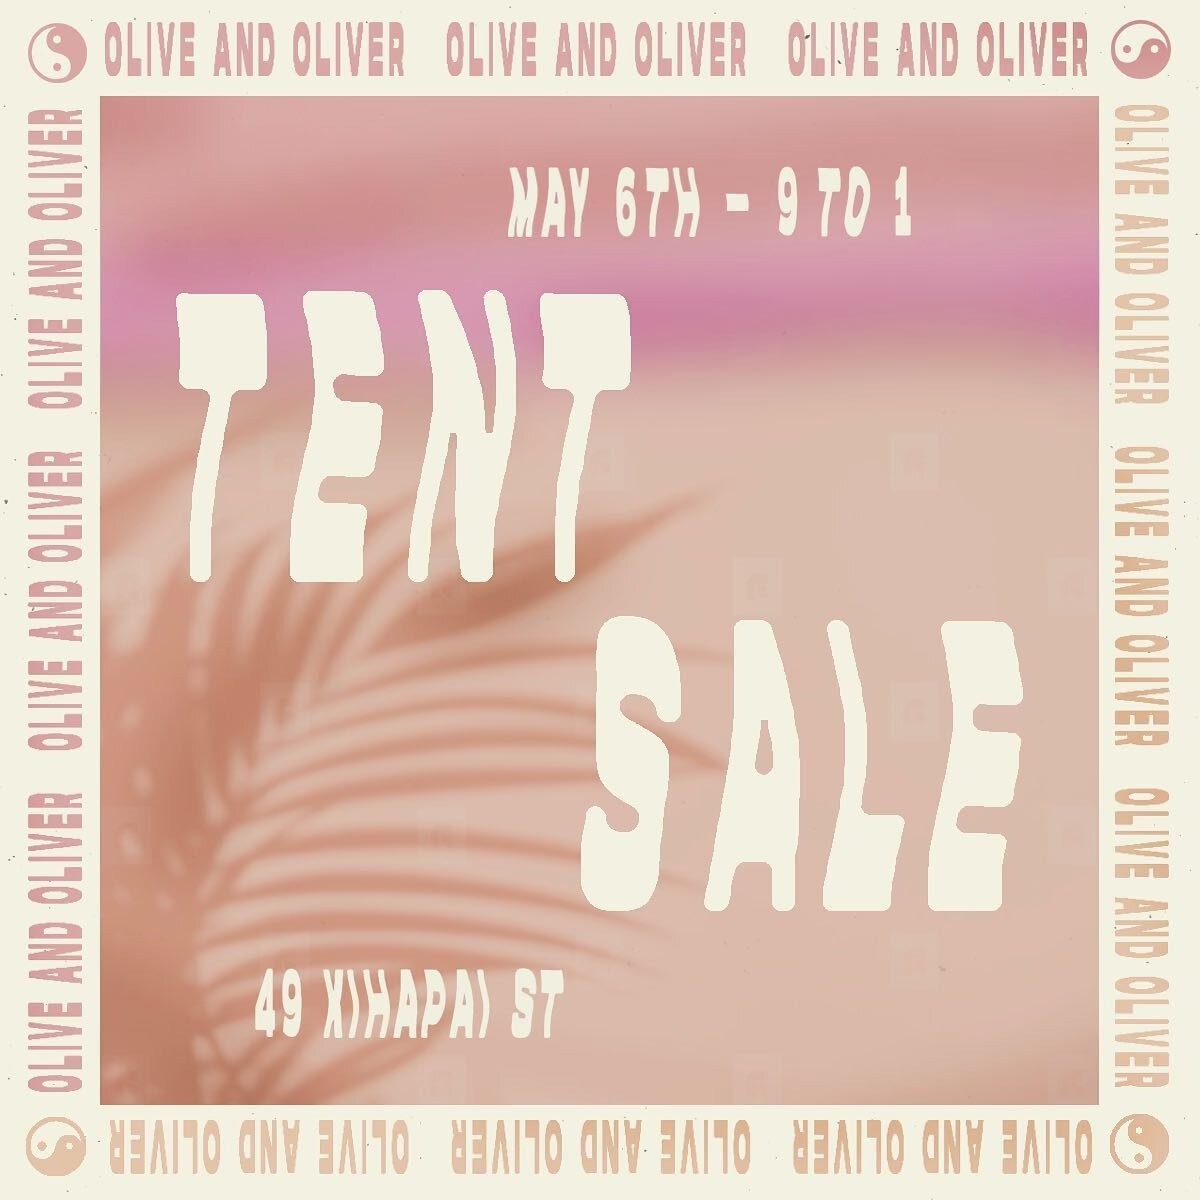 Come check us out!  Spring Tent Sale in our parking lot.  new and used items and a bunch of other vendors as well!  Free beverages provided by @juneshineco 🥂 9am sharp!